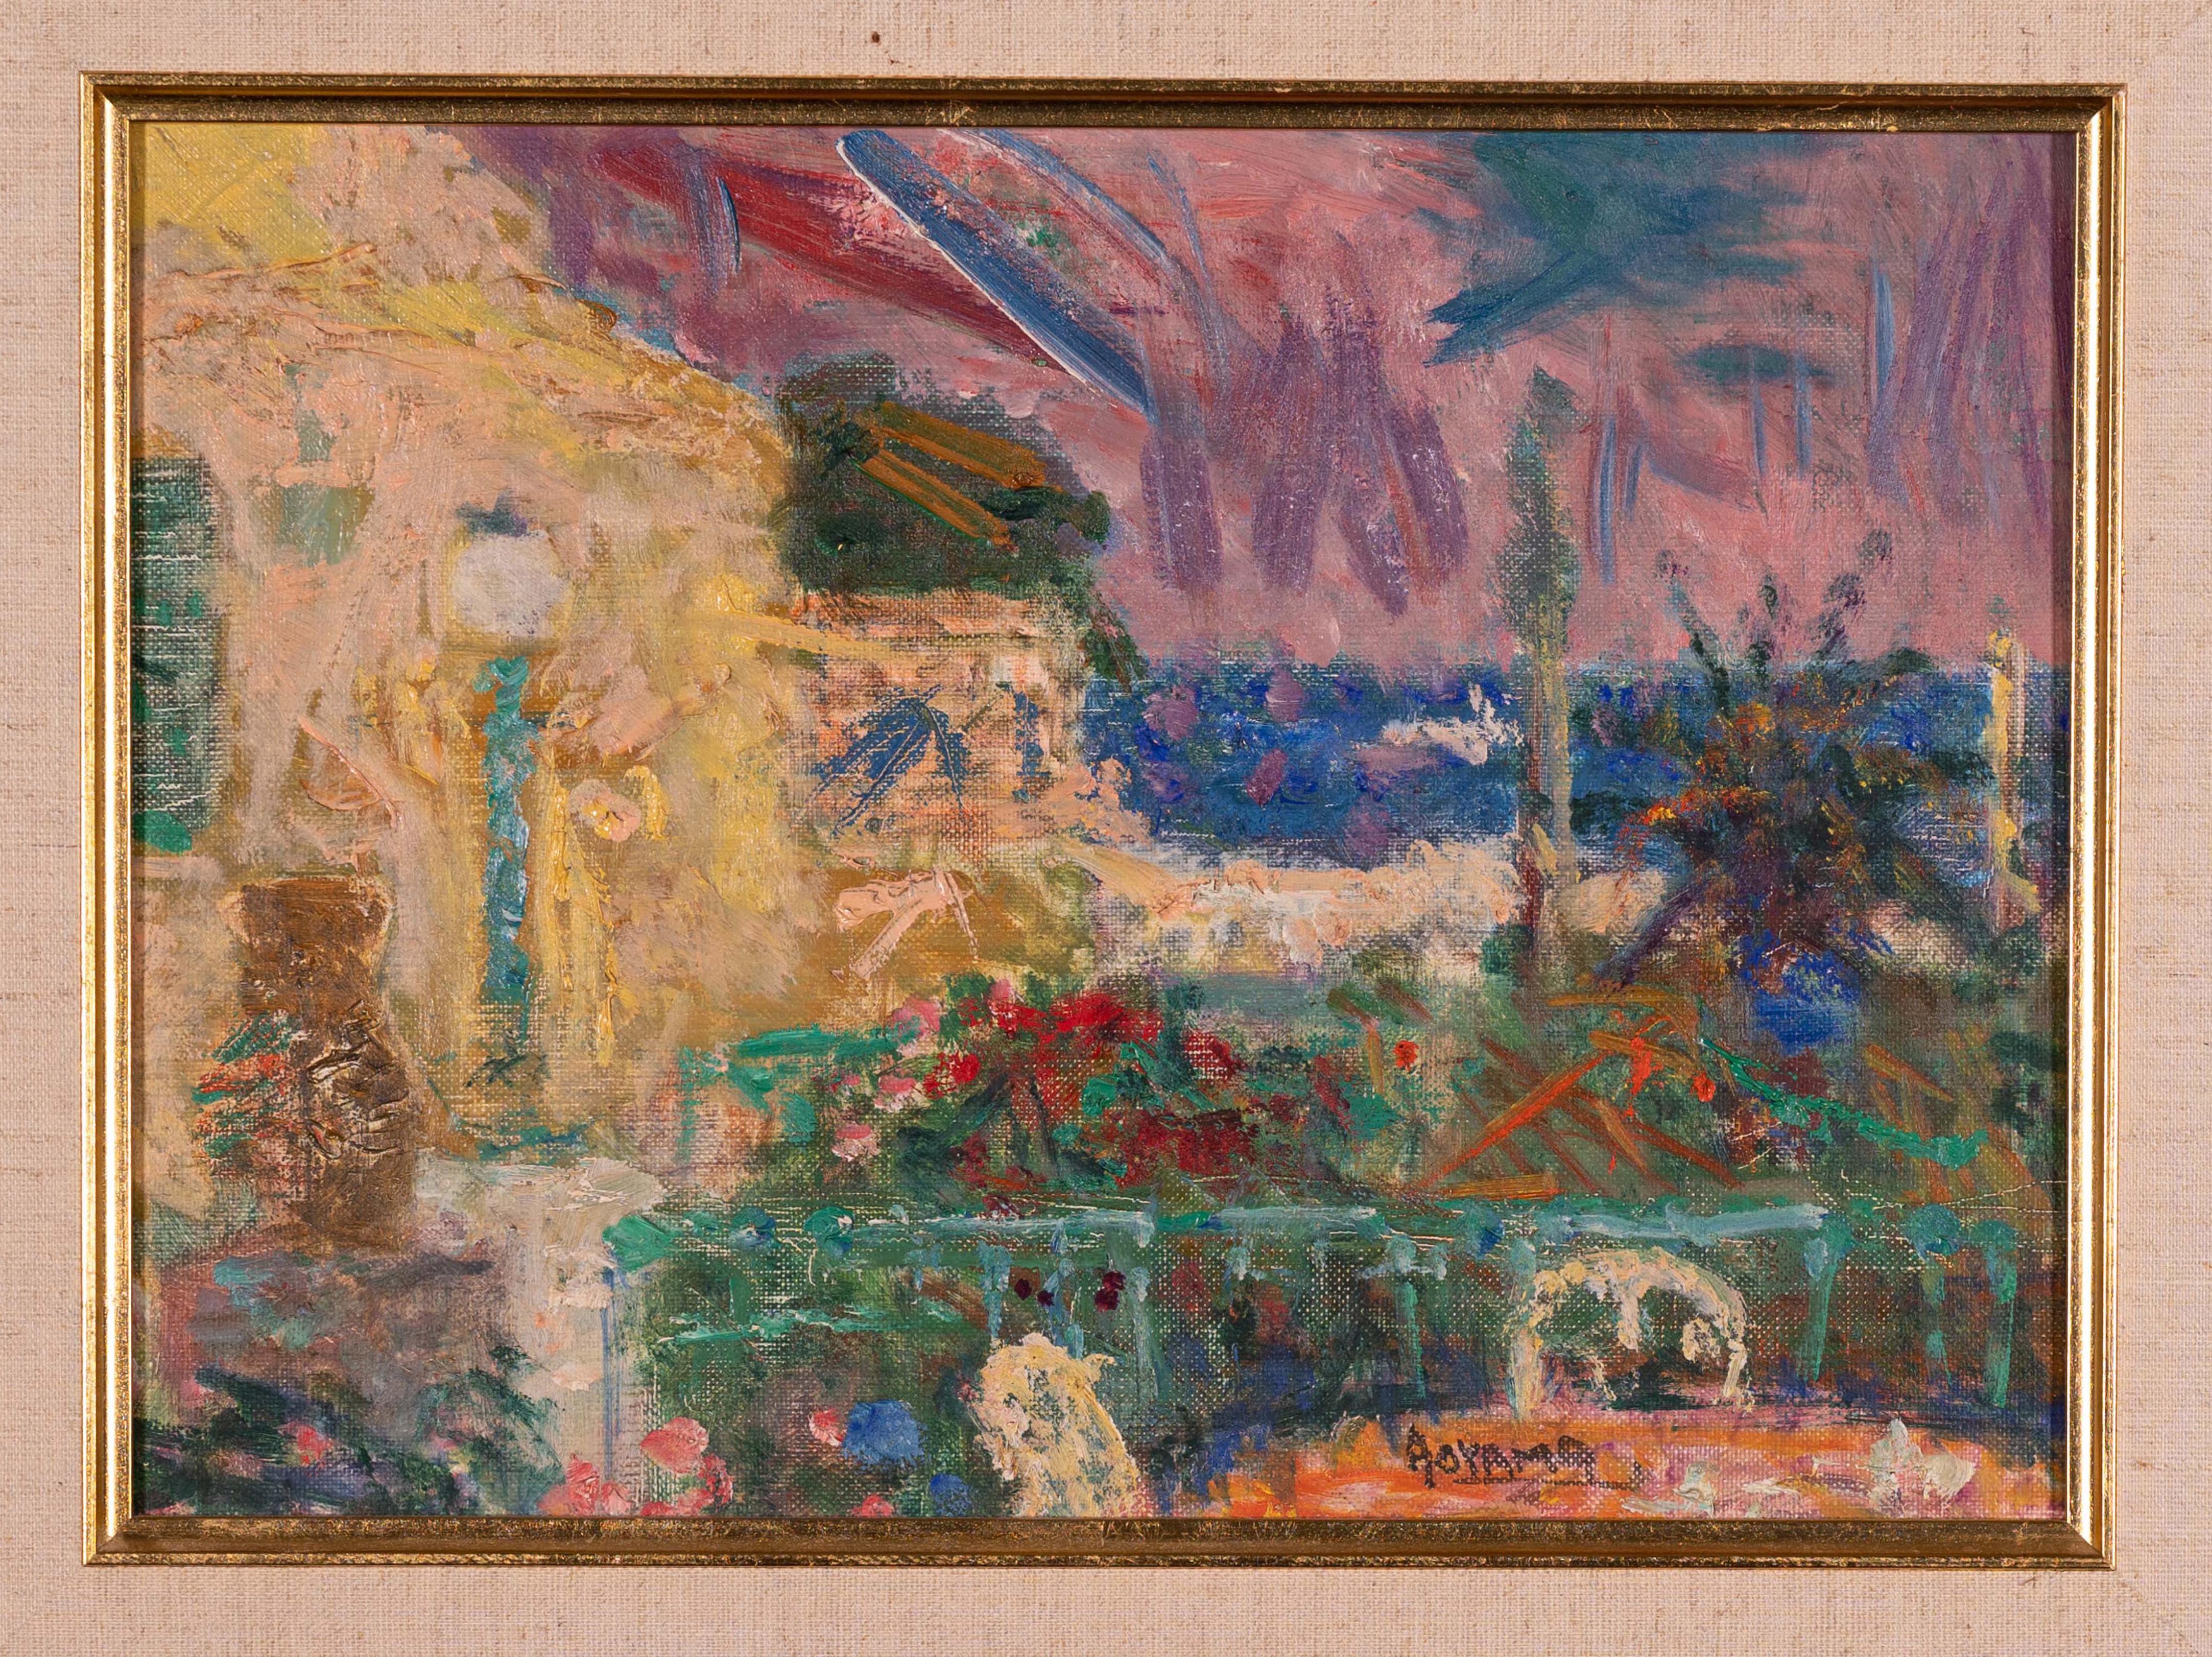 An expressionist oil painting of a seaside view from a balcony in carved gilded frame.
It is signed on the bottom right hand corner Aoyama.
Signed Aoyama circa 1960s-1970s
Frame measures 16 x 19 1/4 inches
Painting measures 9 1/2 x 13 inches
This